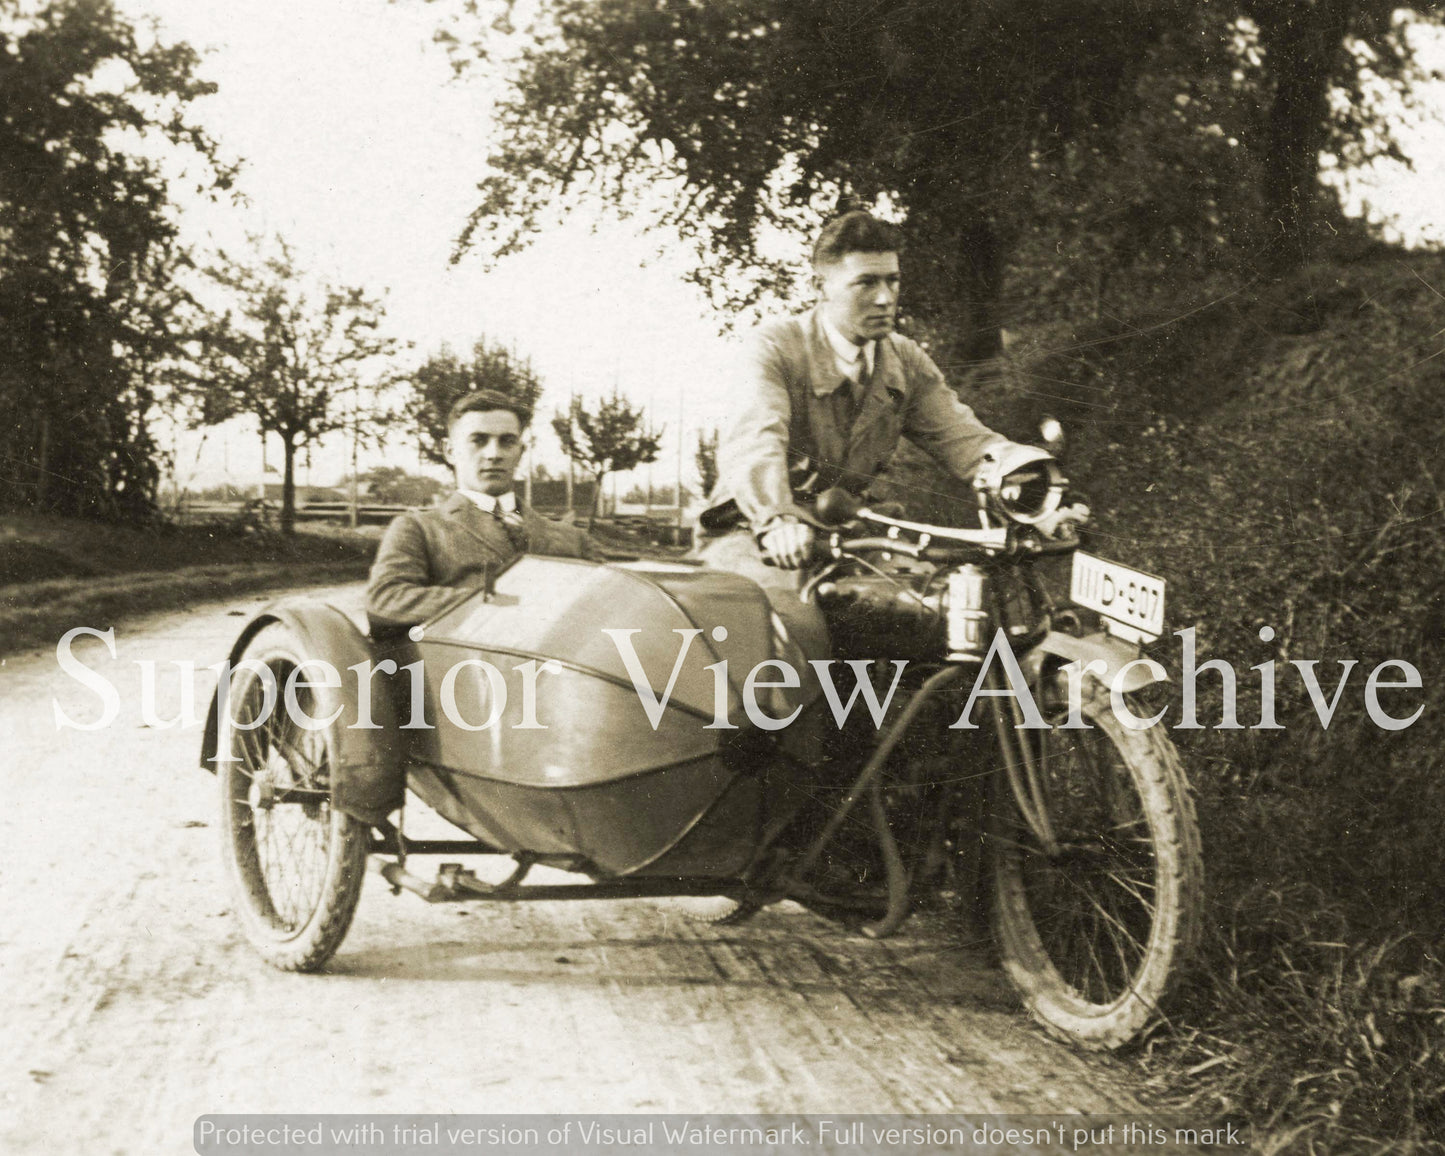 Old Time Indian Motorcycle Photo Indian Side Car Streamline Guys In Ties